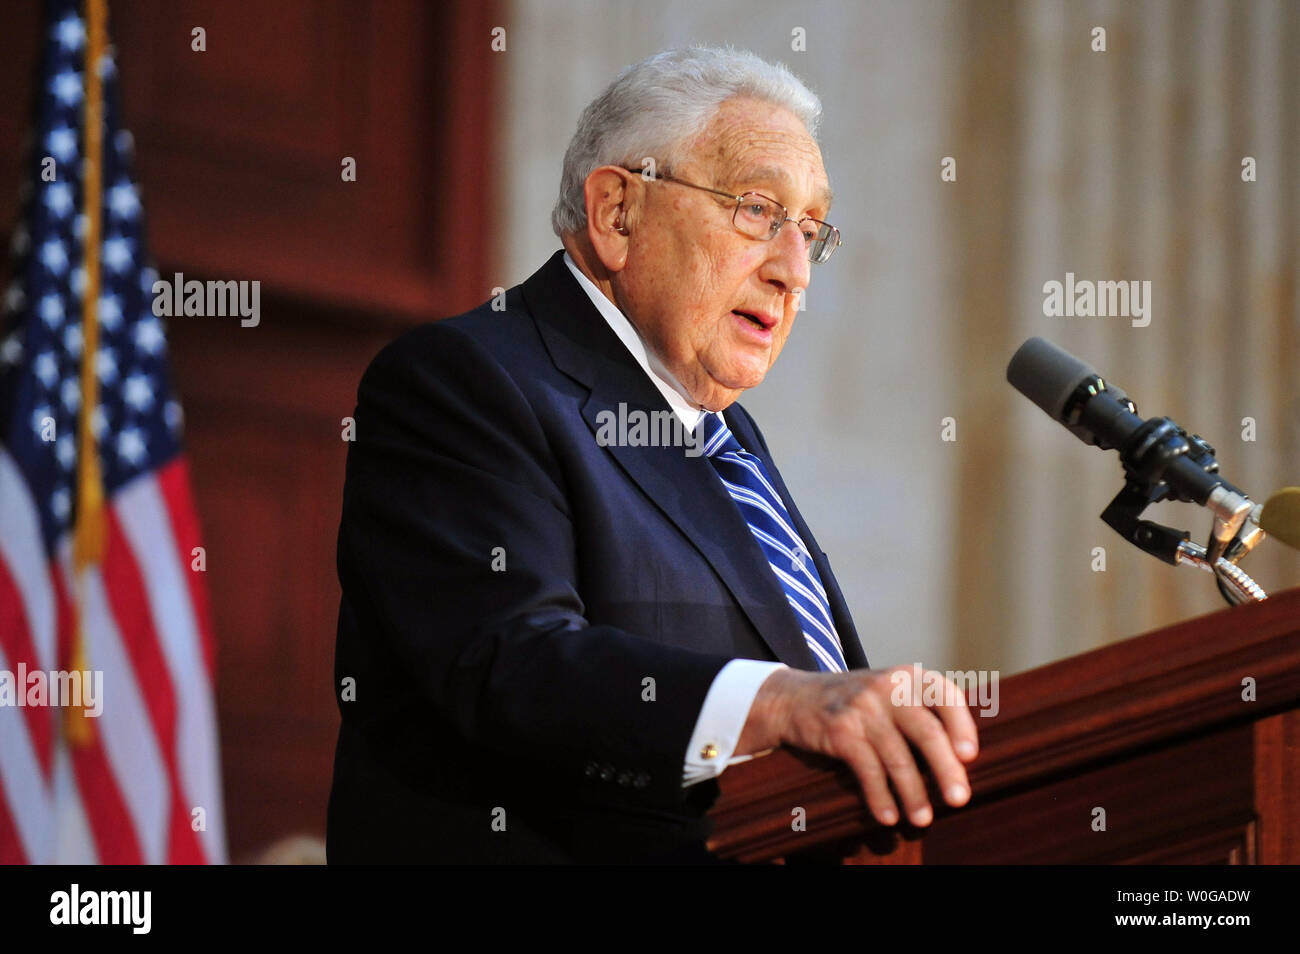 Former Secretary of State Henry Kissinger speaks at the unveiling ceremony for a statue of the late former President Gerald R. Ford in the U.S. Capitol Building in Washington on May 3, 2011.  UPI/Kevin Dietsch Stock Photo